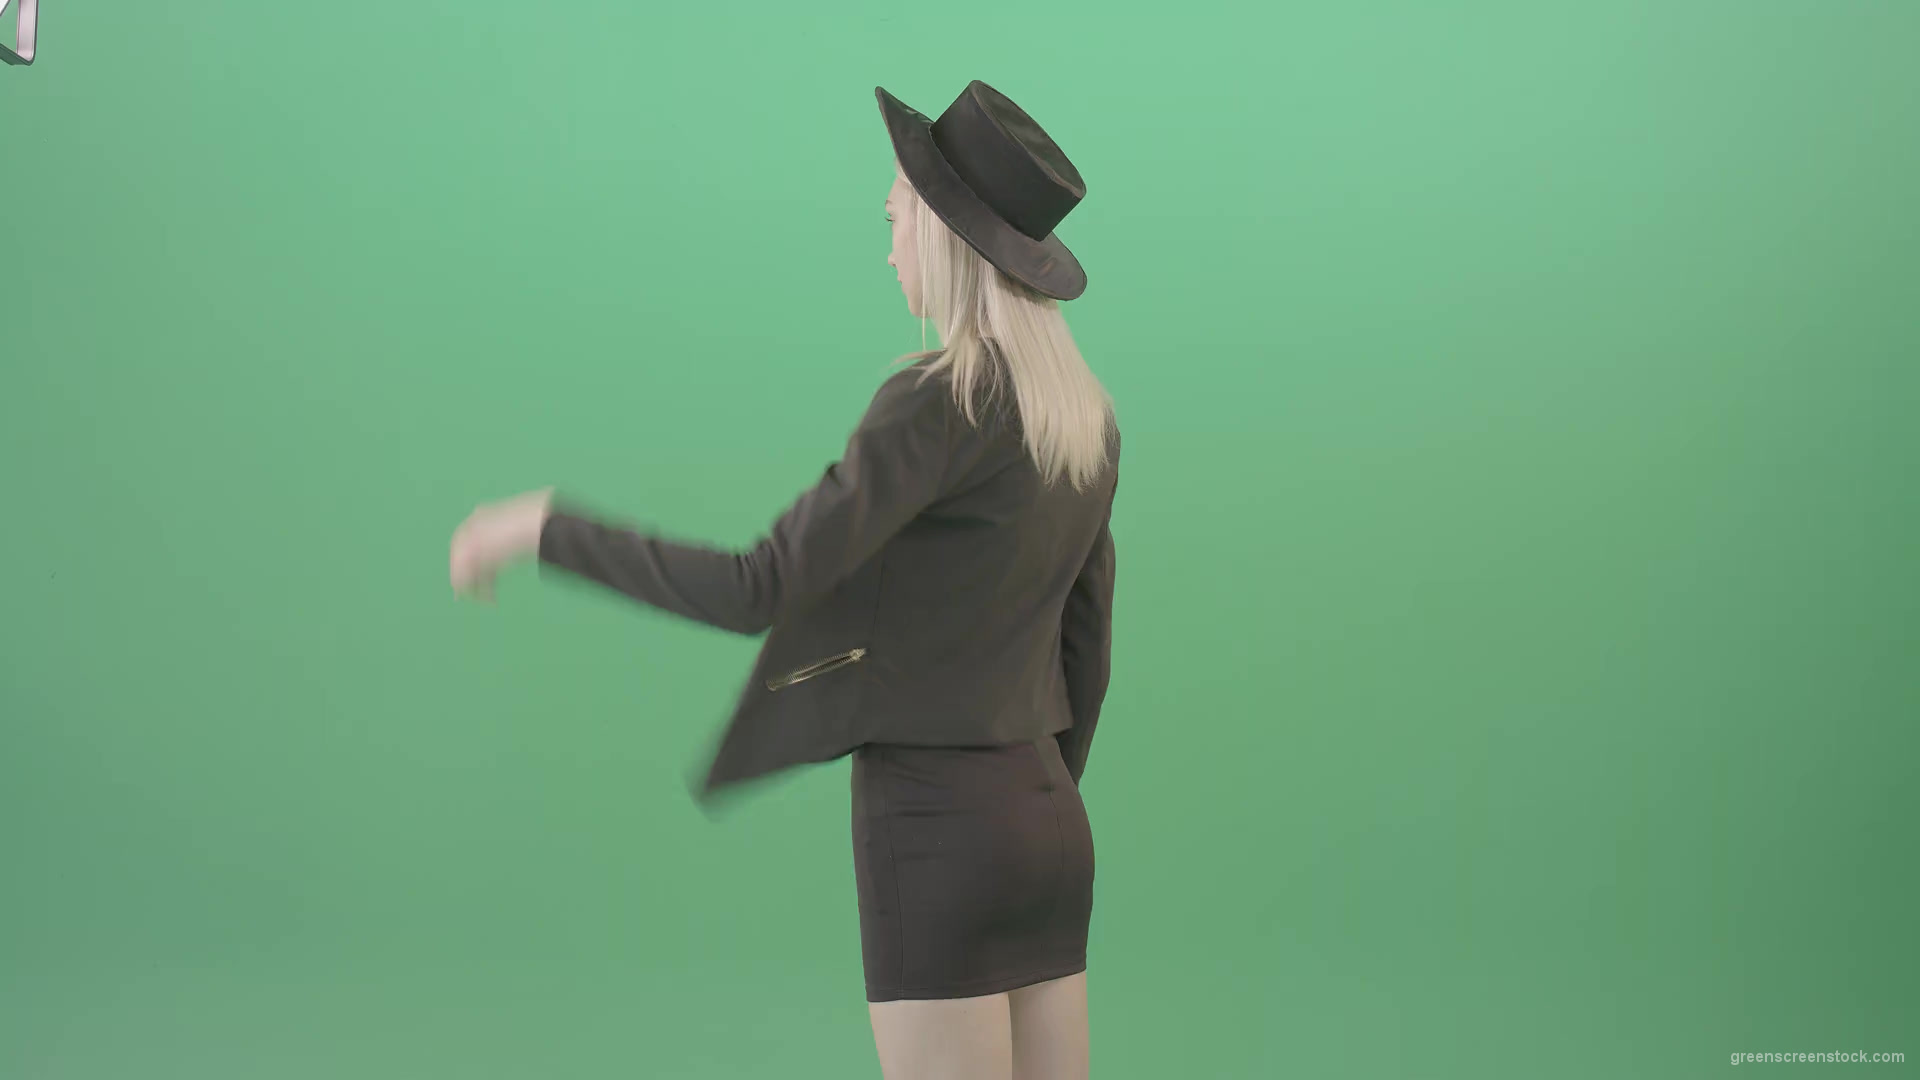 Back-view-black-costume-blonde-girl-looking-virtual-products-on-touch-screen-4K-Green-Screen-Video-Footage-1920_001 Green Screen Stock